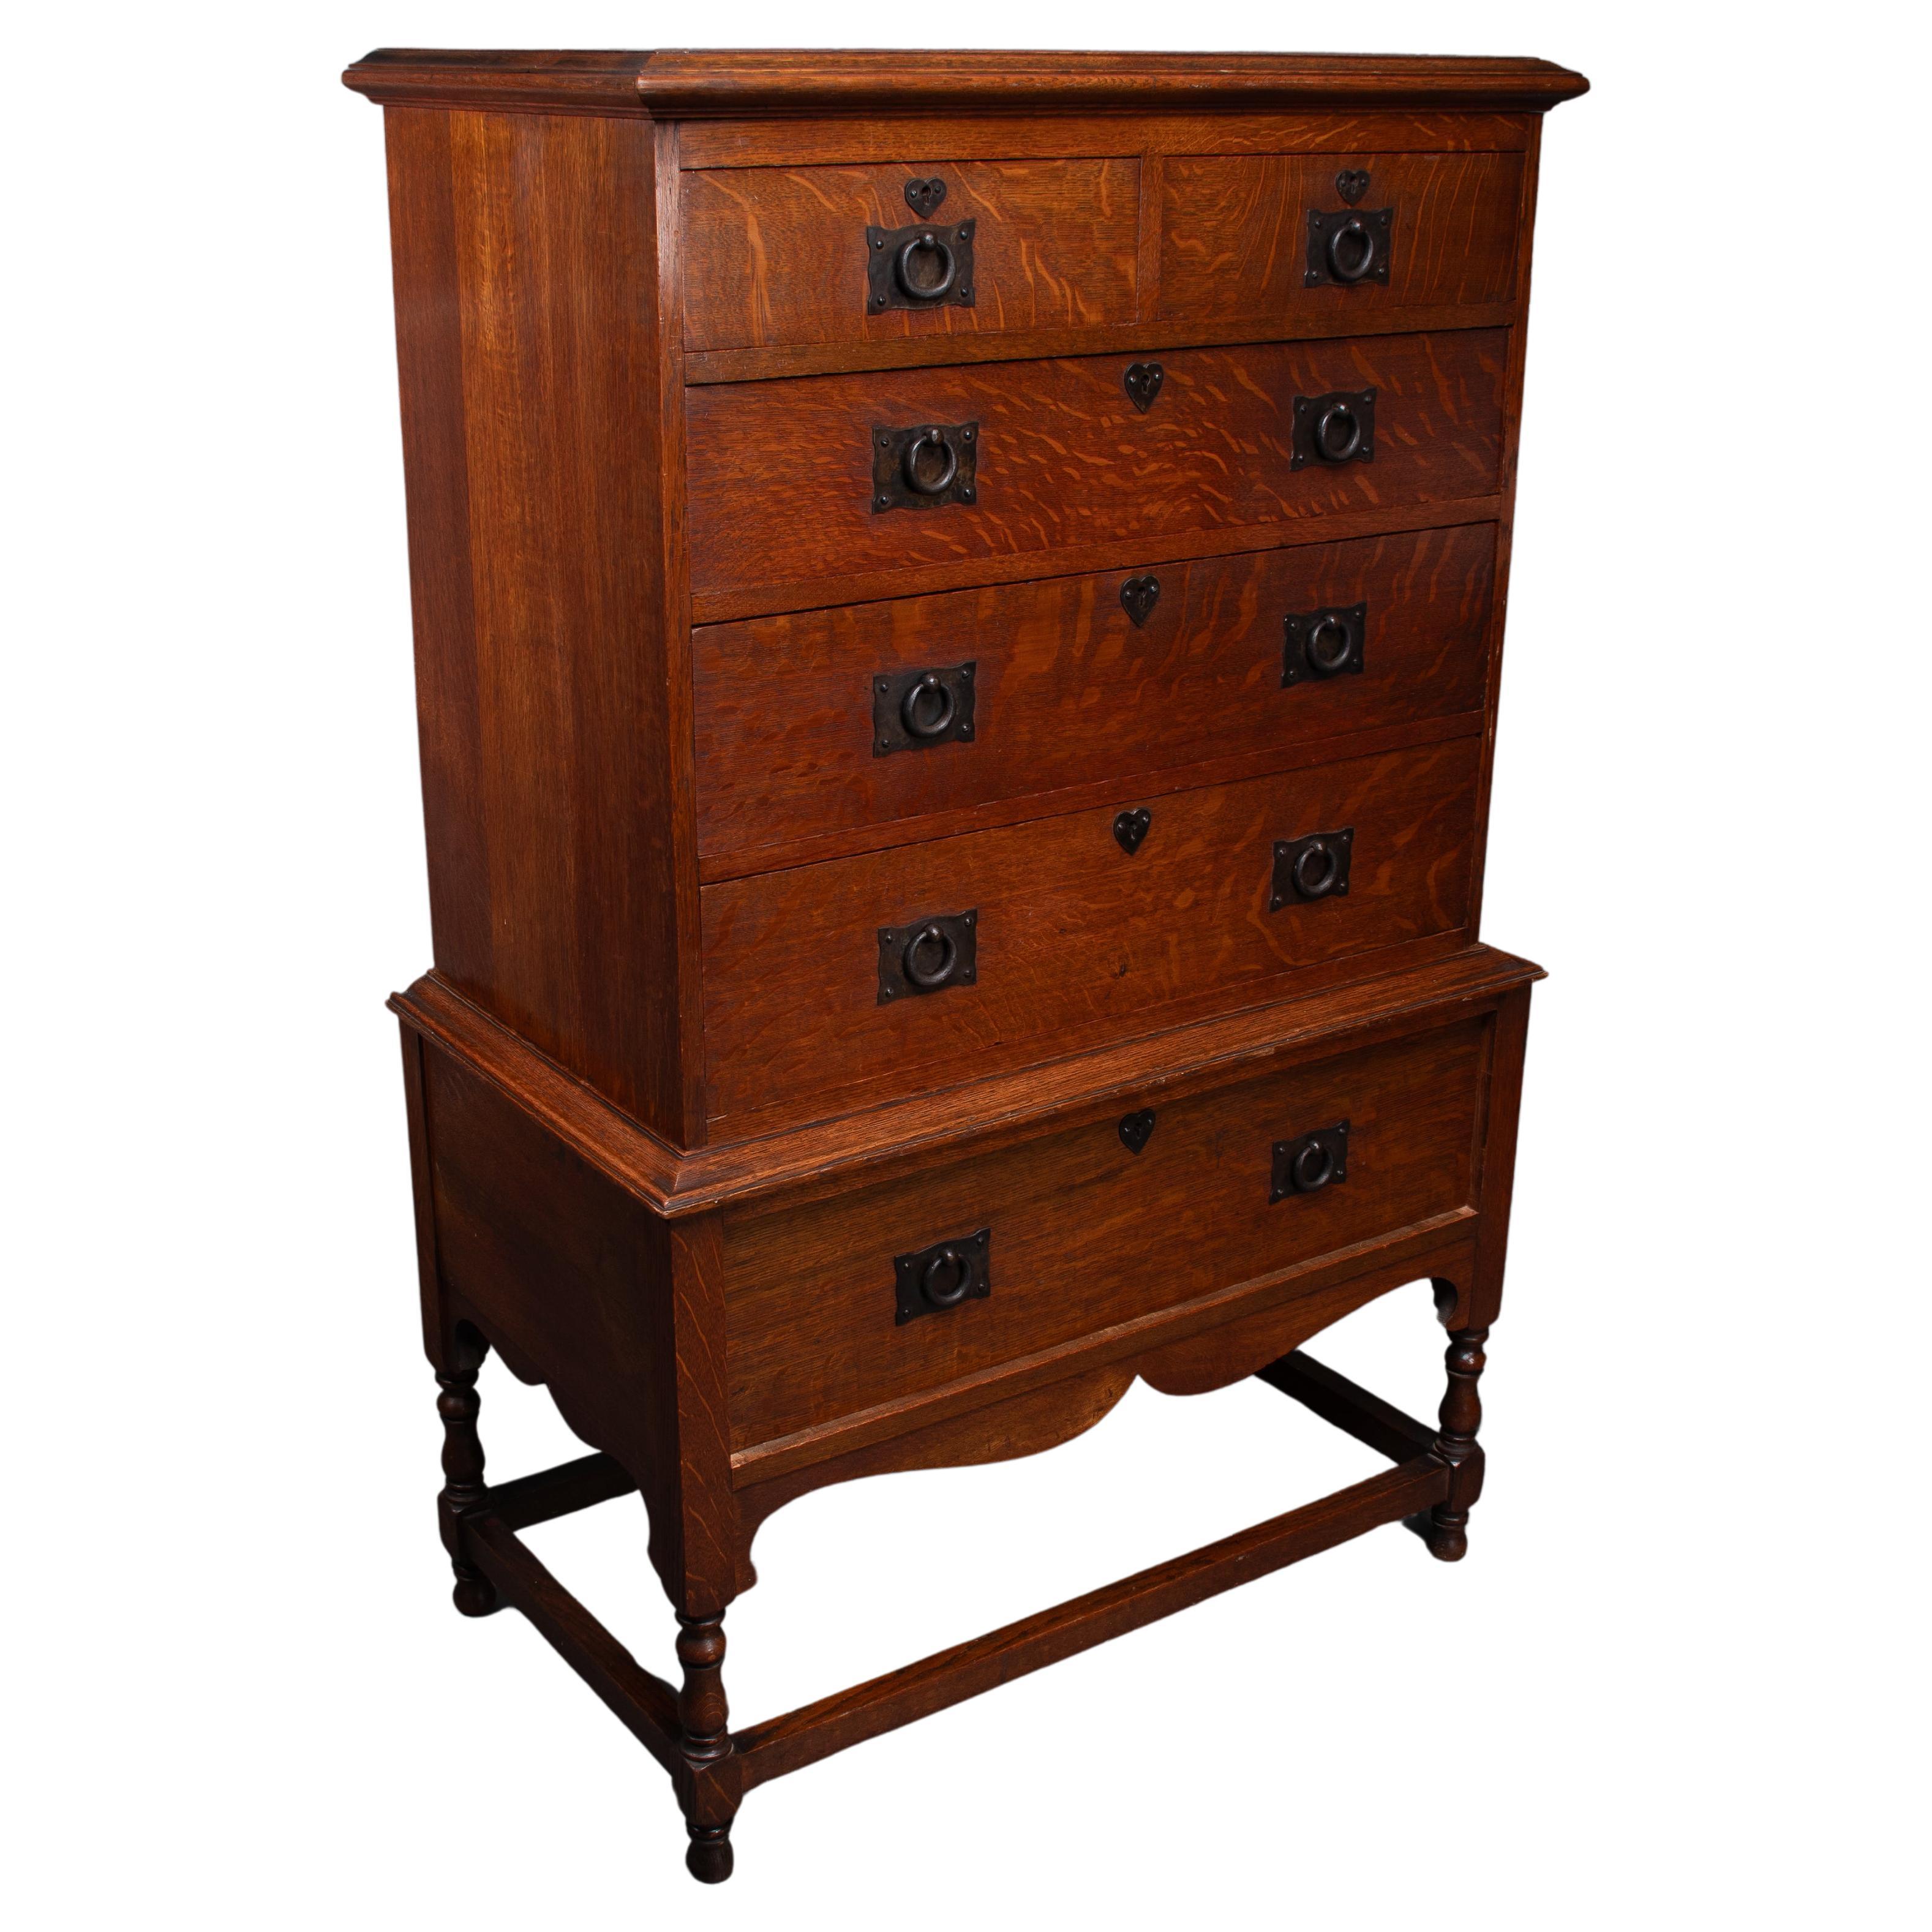 Ambrose Heal A Rare Mansfield Oak Chest of Drawers With Iron Heart Escutcheons